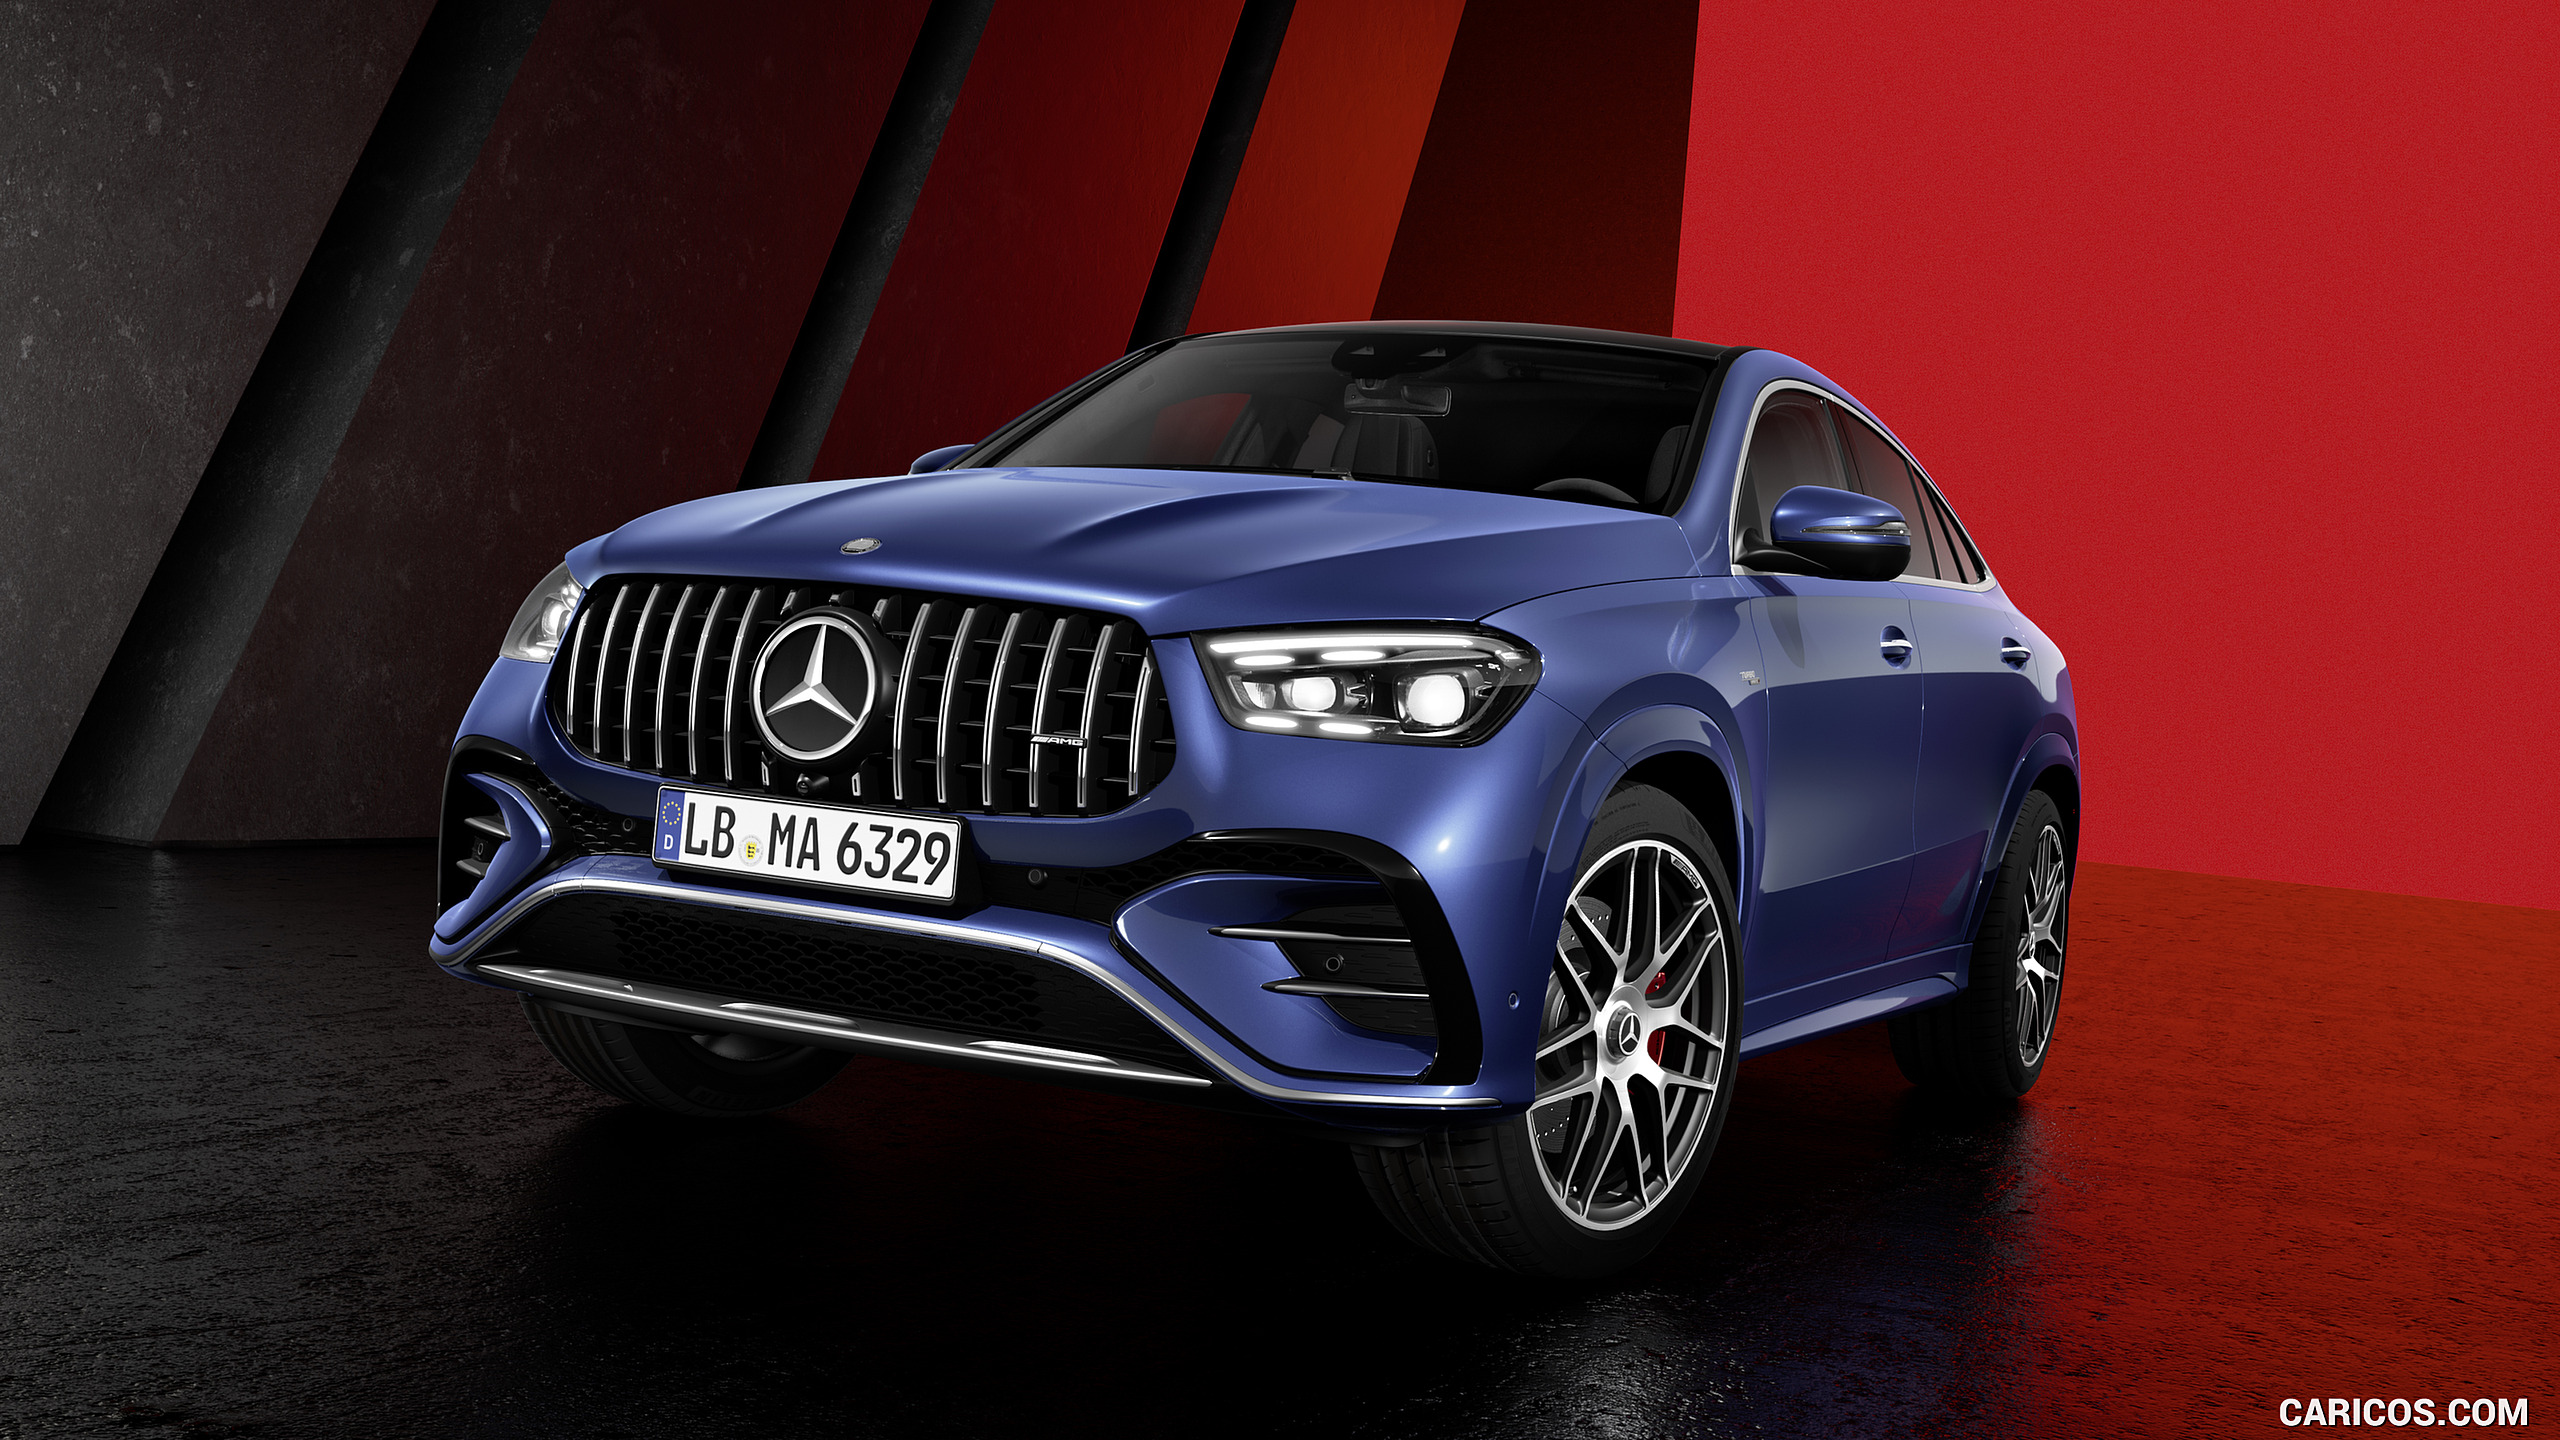 2024 MercedesAMG GLE 53 Coupe Front Caricos